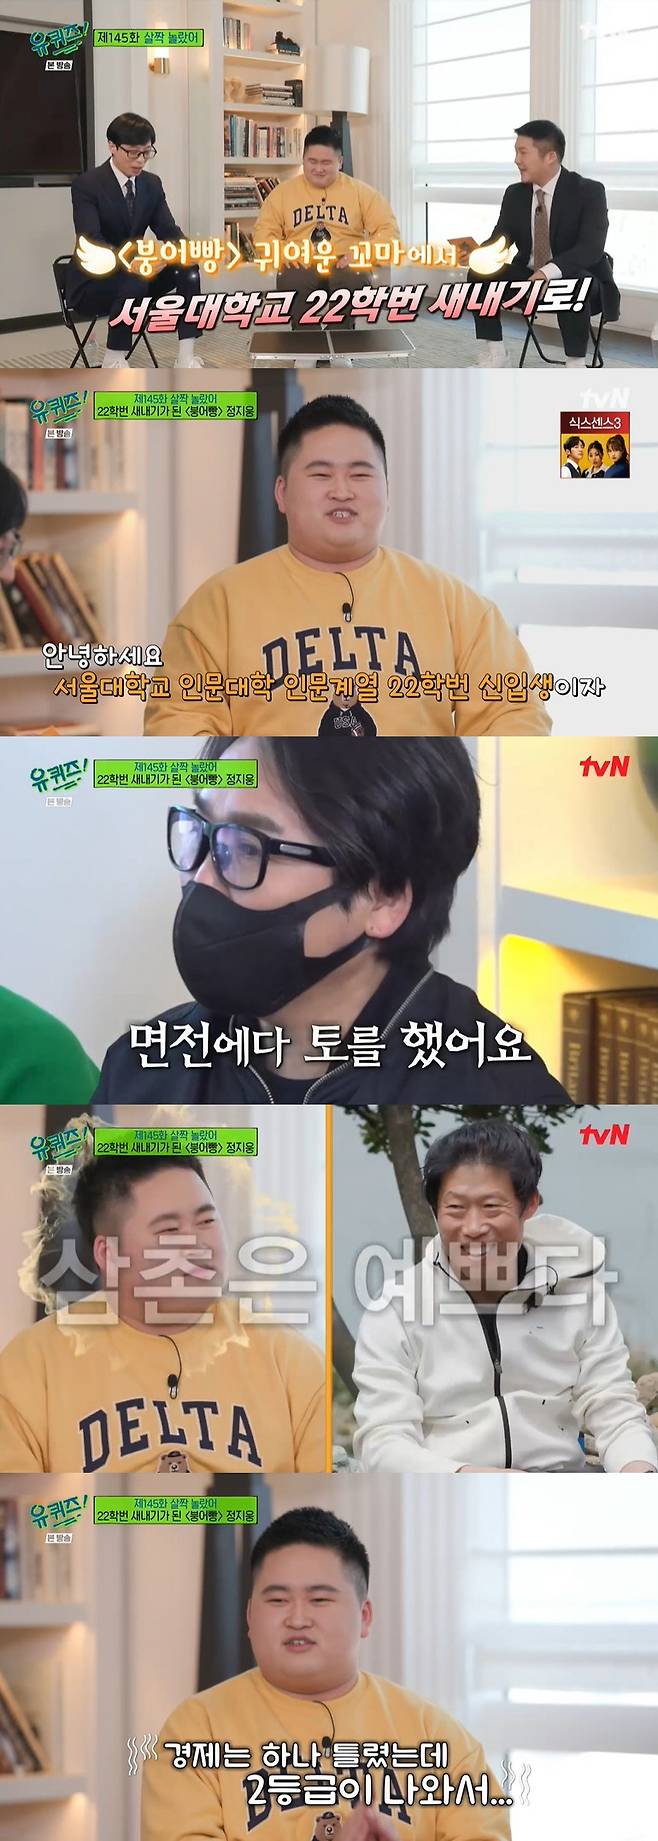 You Quiz on the Block Jung Ji-woong has revealed his current status after passing Seoul National University.On the 16th TVN entertainment program You Quiz on the Block on the Block, actor Jung Eun-pyos son Jung Woong-gun appeared as a guest.Jung Ji-ung passed the Seoul National University this year and became a freshman in his 22nd year. Jung Ji-ung became a representative brain since he was a child, known as I.Q.167.Regarding the acceptance testimony, Jung Woong-gun said, I did not know how to stick.I have been working really hard for a year and thought, I have to go to Seoul National University. I am so honored to pass and I am still surprised. Jung Eun-pyo, who came to the filming site together, said, I posted a video of the announcement of the successful candidate on my personal channel.Regardless of our intentions, there are a lot of rumors, so I am embarrassed and ashamed, but it is too good in my heart. Jung Woong-gun said, I studied for three years and before that, I had TV, but I was forgetting all of them.I am so grateful that the Ransun aunt, The Uncle, who was hiding, congratulated me. Celebration baptisms followed in the entertainment industrys aunt The Uncles, as well as actor Yu Hae-jin, who offered congratulations through Jung Eun-pyo.Jung Eun-pyo said, I bought pork belly. I have a relationship with Ji Woong Lee. When I was 100 days old, Ji Woong Lee was so beautiful.Next time I came to my house, Ji Woong was lying down, so I hypnotized The Uncle is beautiful. But I puked again.Haejin is so beautiful that sometimes it is difficult to buy Chungkukjang. In this years SAT, which was a incompetence in the past, Jung Woong-gun was wrong about 12 ~ 13 in total.The first grade in Korean, the first grade in mathematics, the second grade in English, and the economy were wrong, but the second grade came out.Jung Woong-gun, who did not eat food 100 days before the SAT, said, I should go down to the food room.I did not go to the lunch room because the time was so bad. He said he ate mainly food and delivery food.Jung Eun-pyo, who always picked up Jung Ji-woong, was the father who suggested a drive to Jung Ji-woong, who seemed to be struggling without nagging.Jung Ji-woong said, My parents do not nag me to study. I do not say Do not do it. Its your life.Jung Eun-pyo said of Ji Woong-gun as a child, If you go to the school, you will get a call from the teacher the next day.I accidentally went out of the gifted excavation program, and I.Q. was 167.The professor said that these children were born with good bowls, and when parents tried to fill them, they were overflowing, and if they did not fill them, the bowl would grow.But I dont know. I thought you did well. Jung Eun-pyos idea for Ji Woongs life was Lets get as much out of it as possible.As for the dream, I wanted to play hip-hop before I got to the entrance exam. I have so much to do after I have.I think I should have a lot of experience while living in college. 